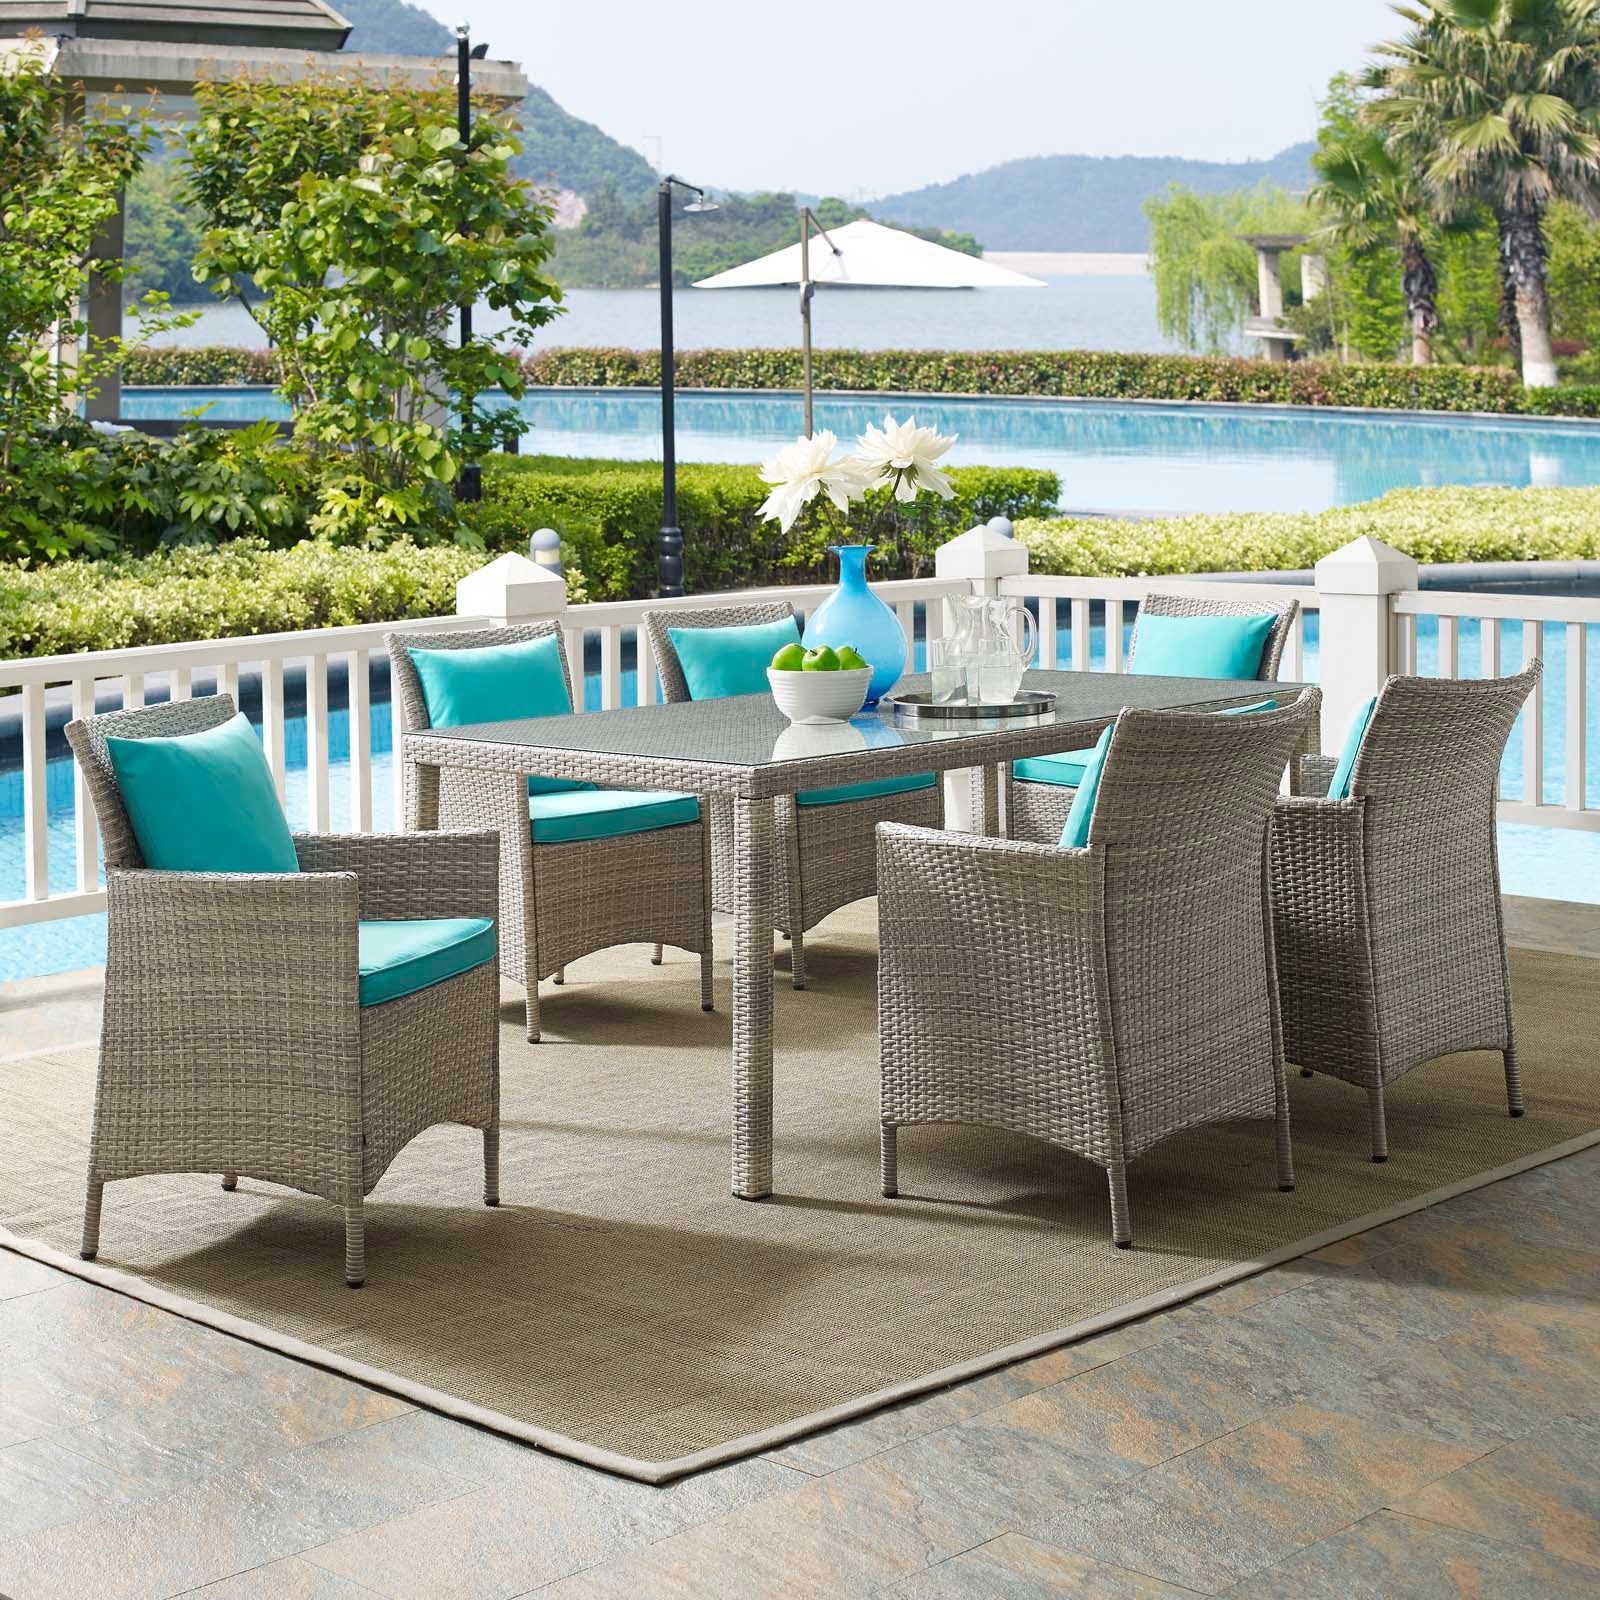 Modway Outdoor Dining Sets - Conduit 7 Piece Outdoor Patio Wicker Rattan Dining Set Light Gray Turquoise